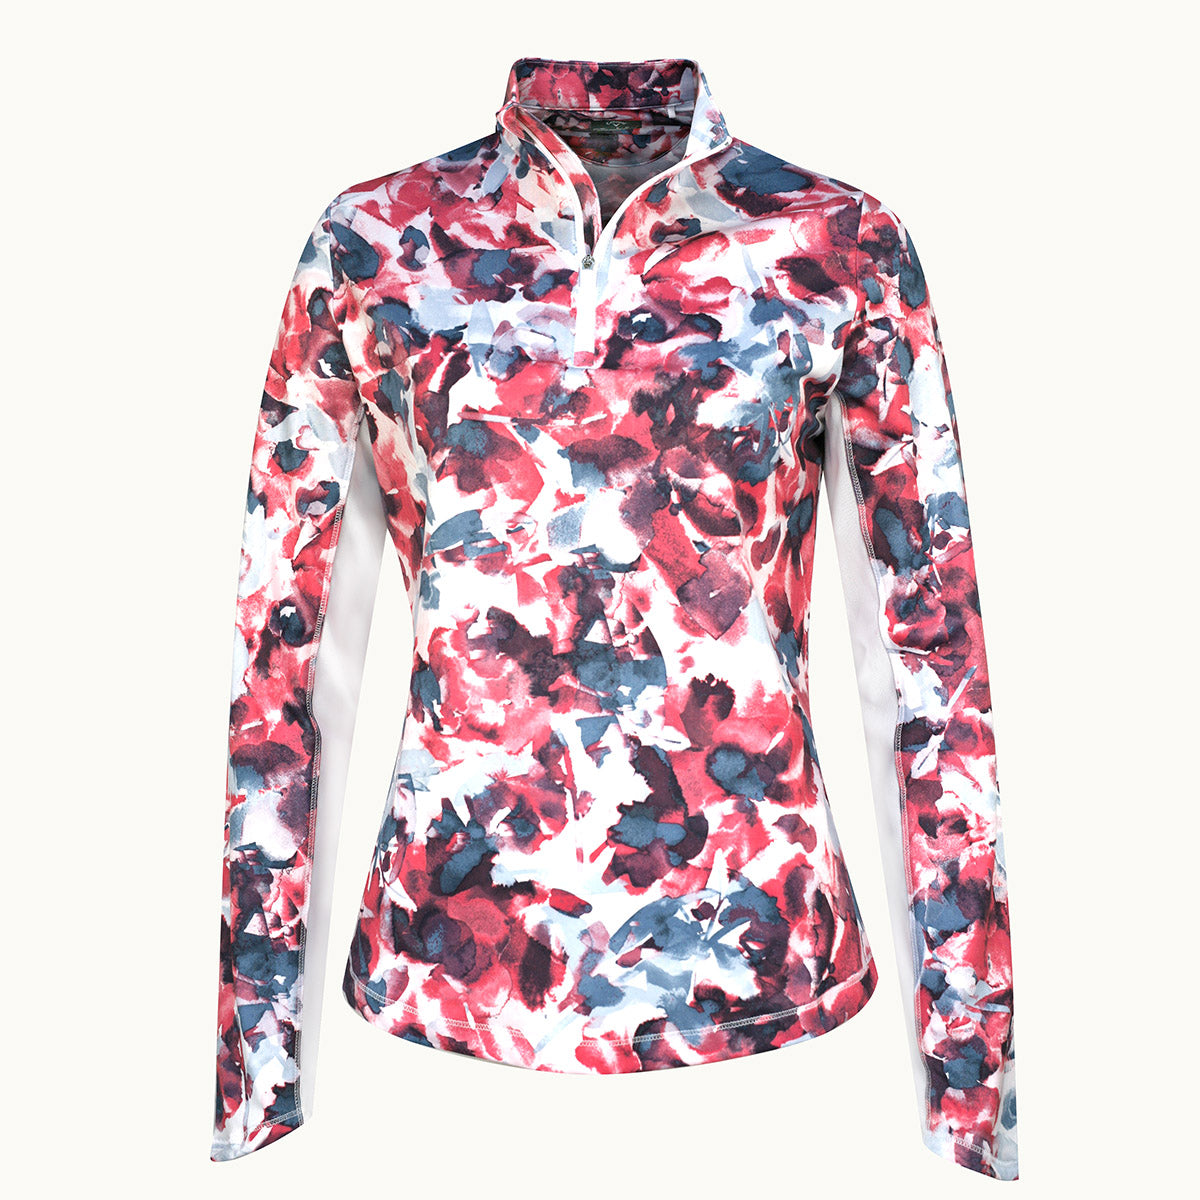 Brushed Floral Sun Protection Top